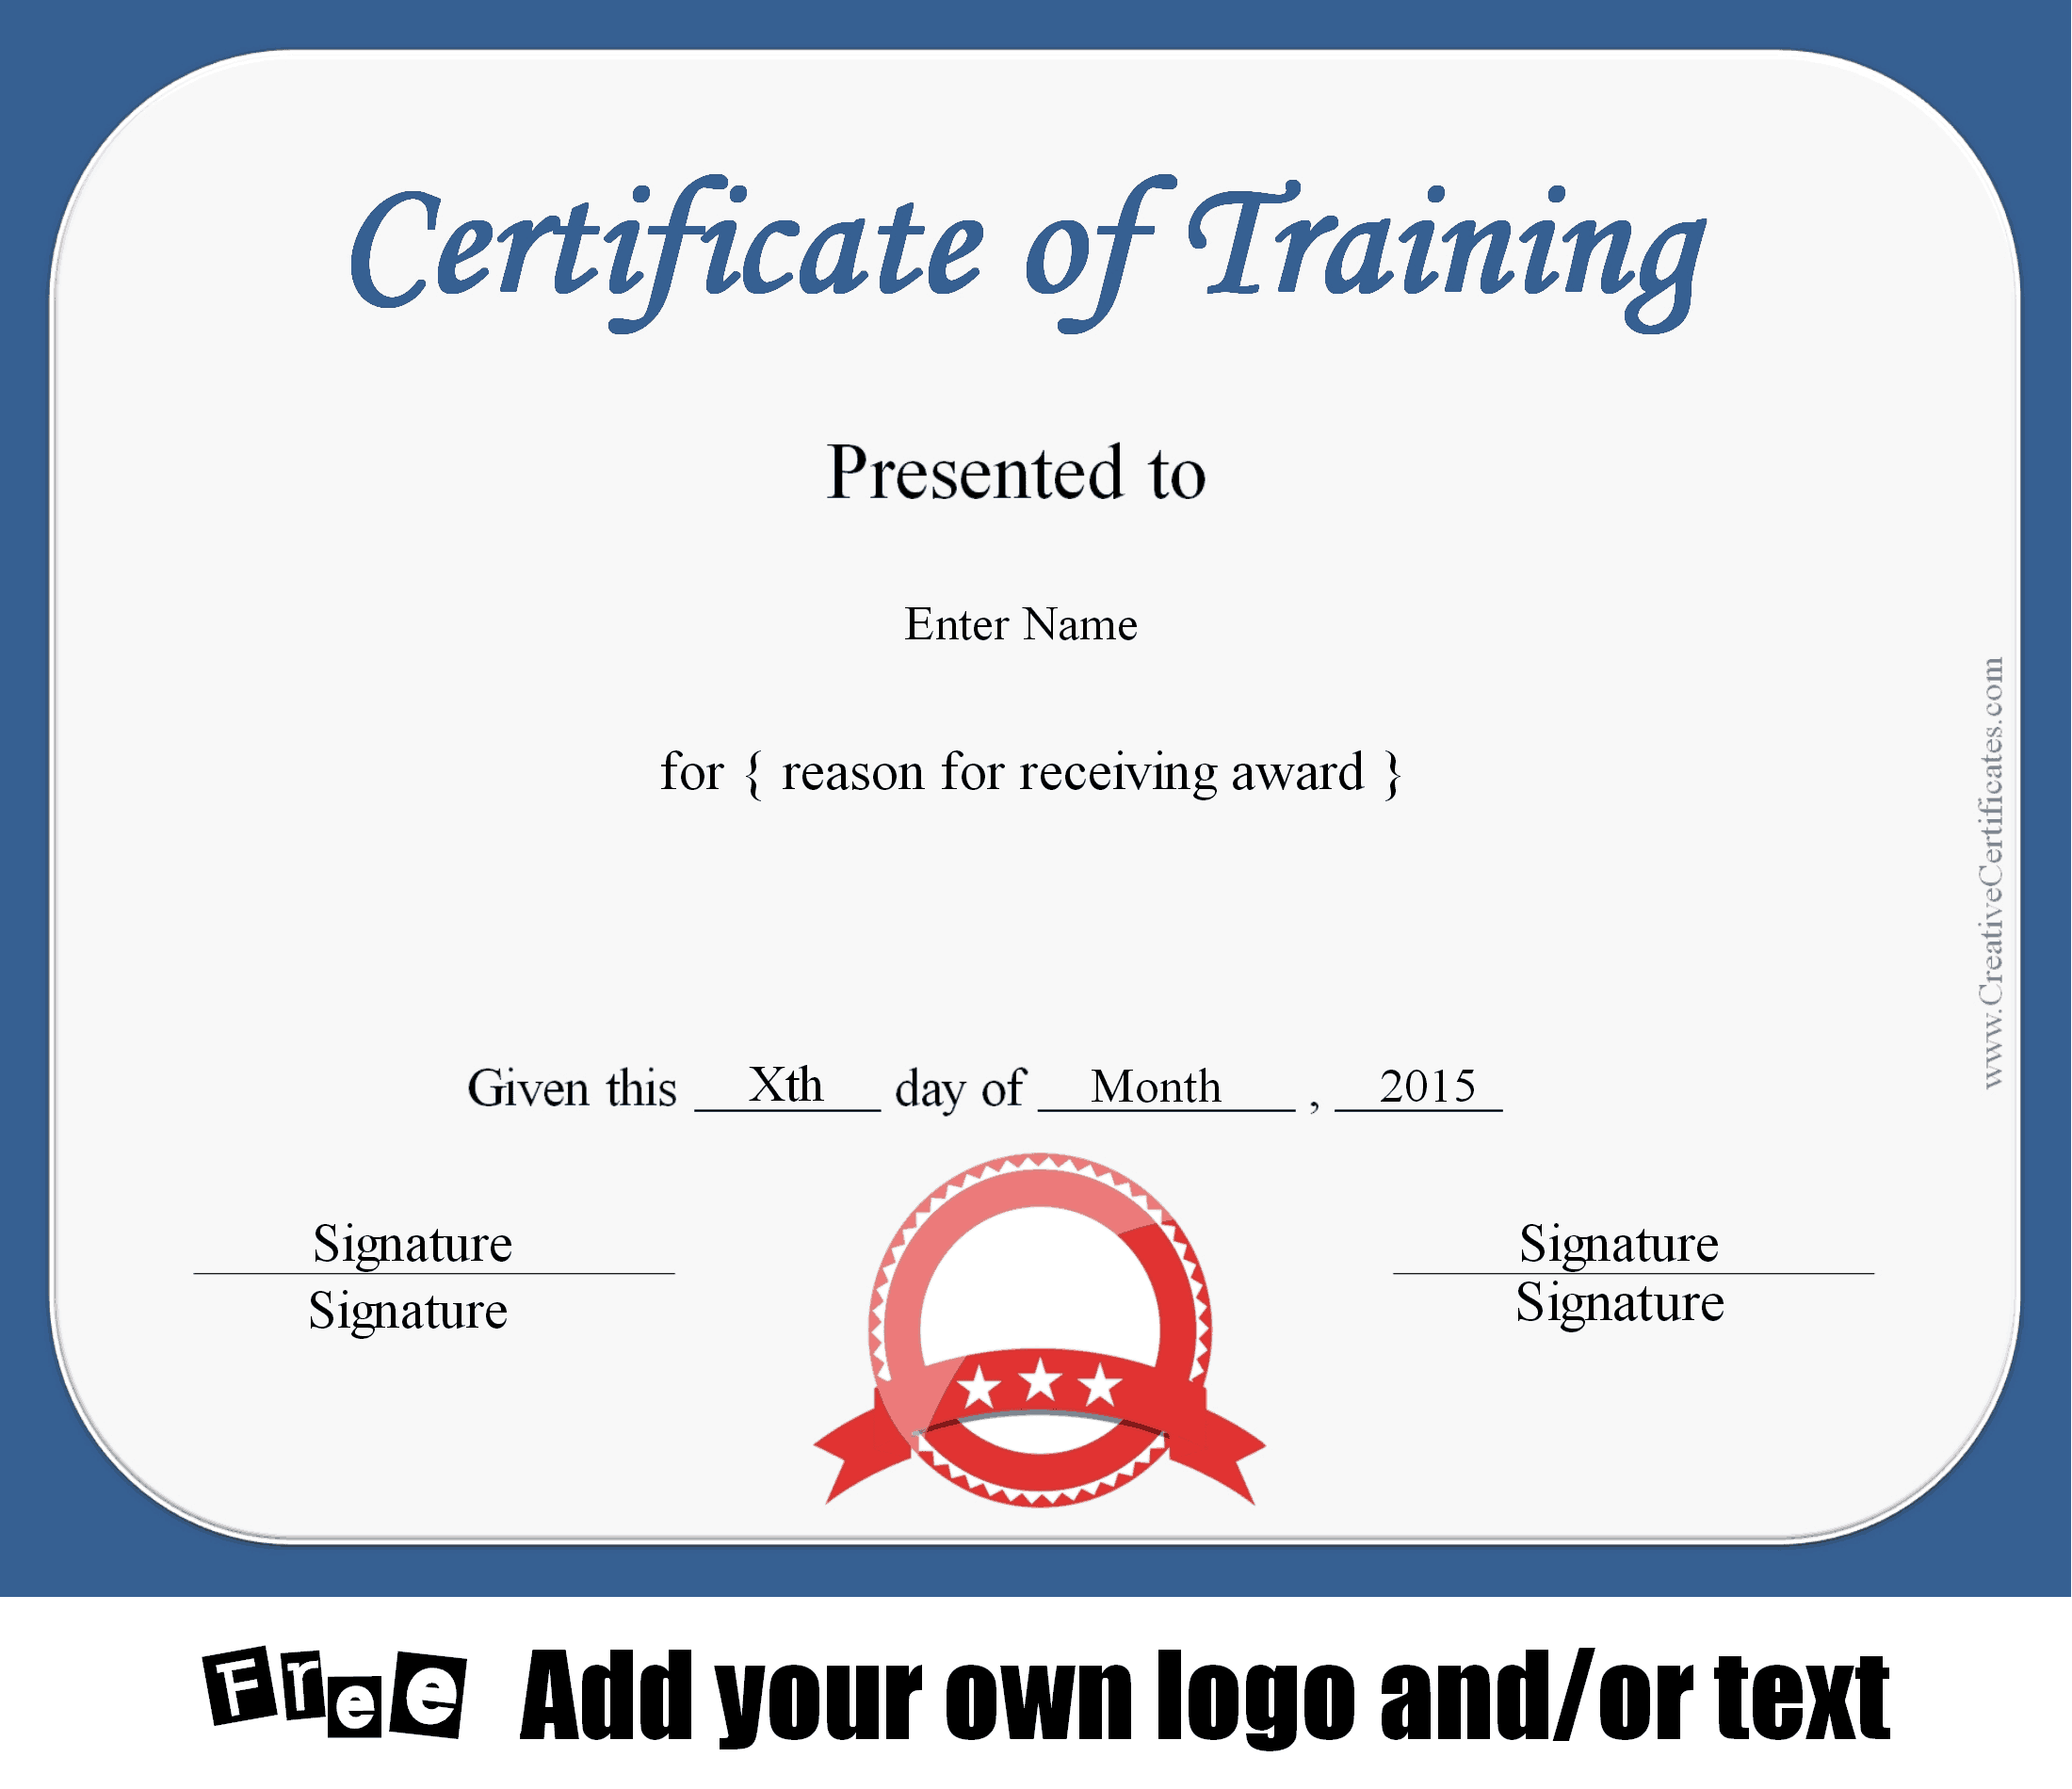 Certificate of training template